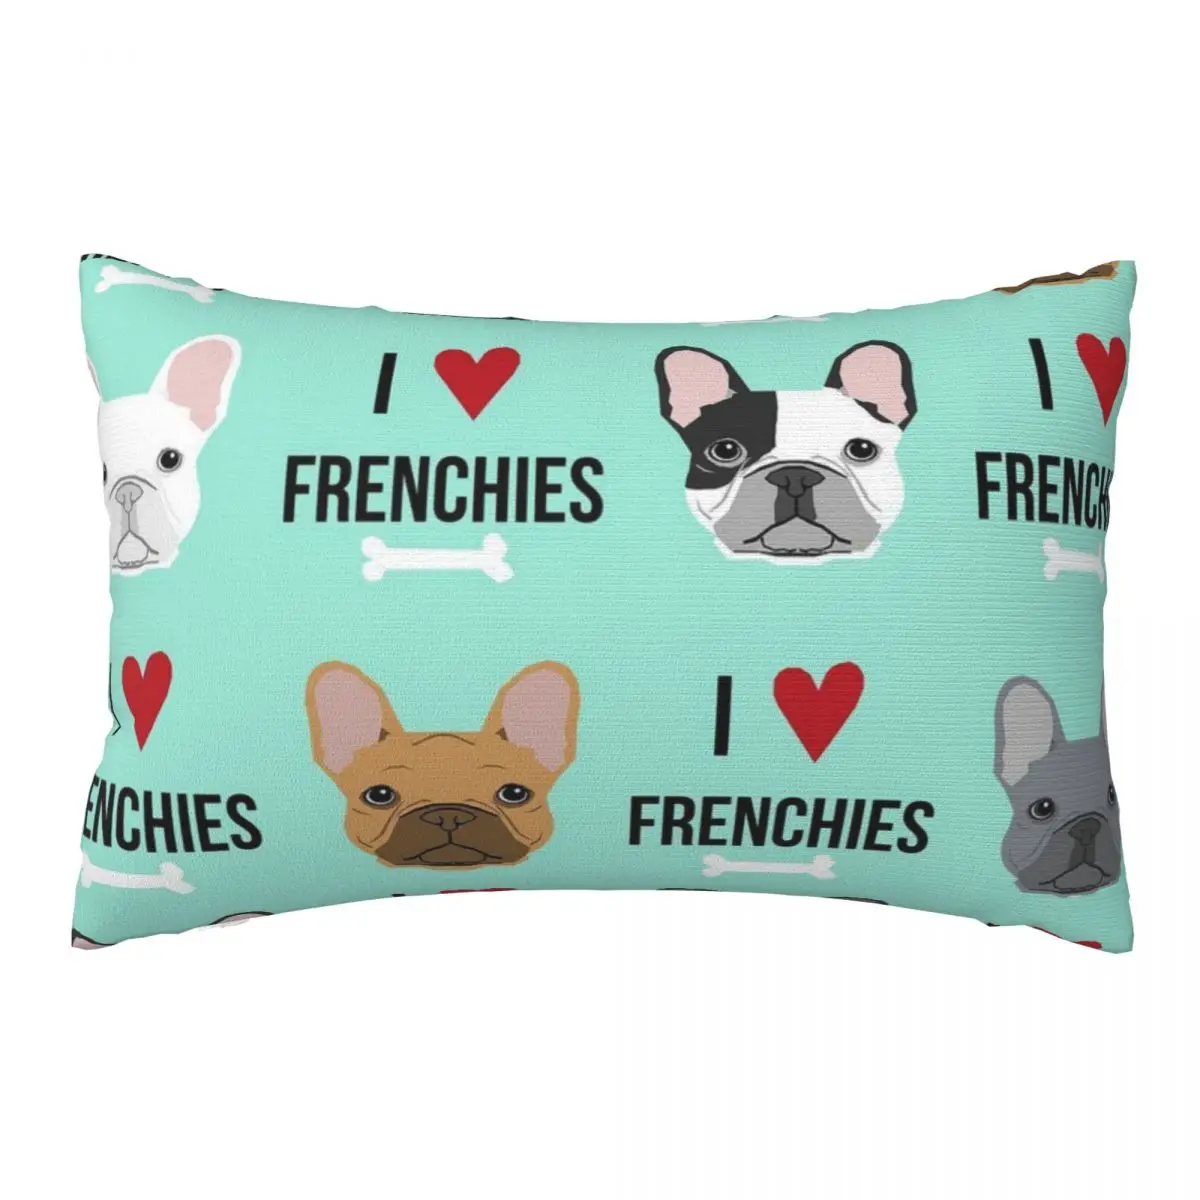 

I Love Frenchies Dog Decorative Pillow Covers Throw Pillow Cover Home Pillows Shells Cushion Cover Zippered Pillowcase